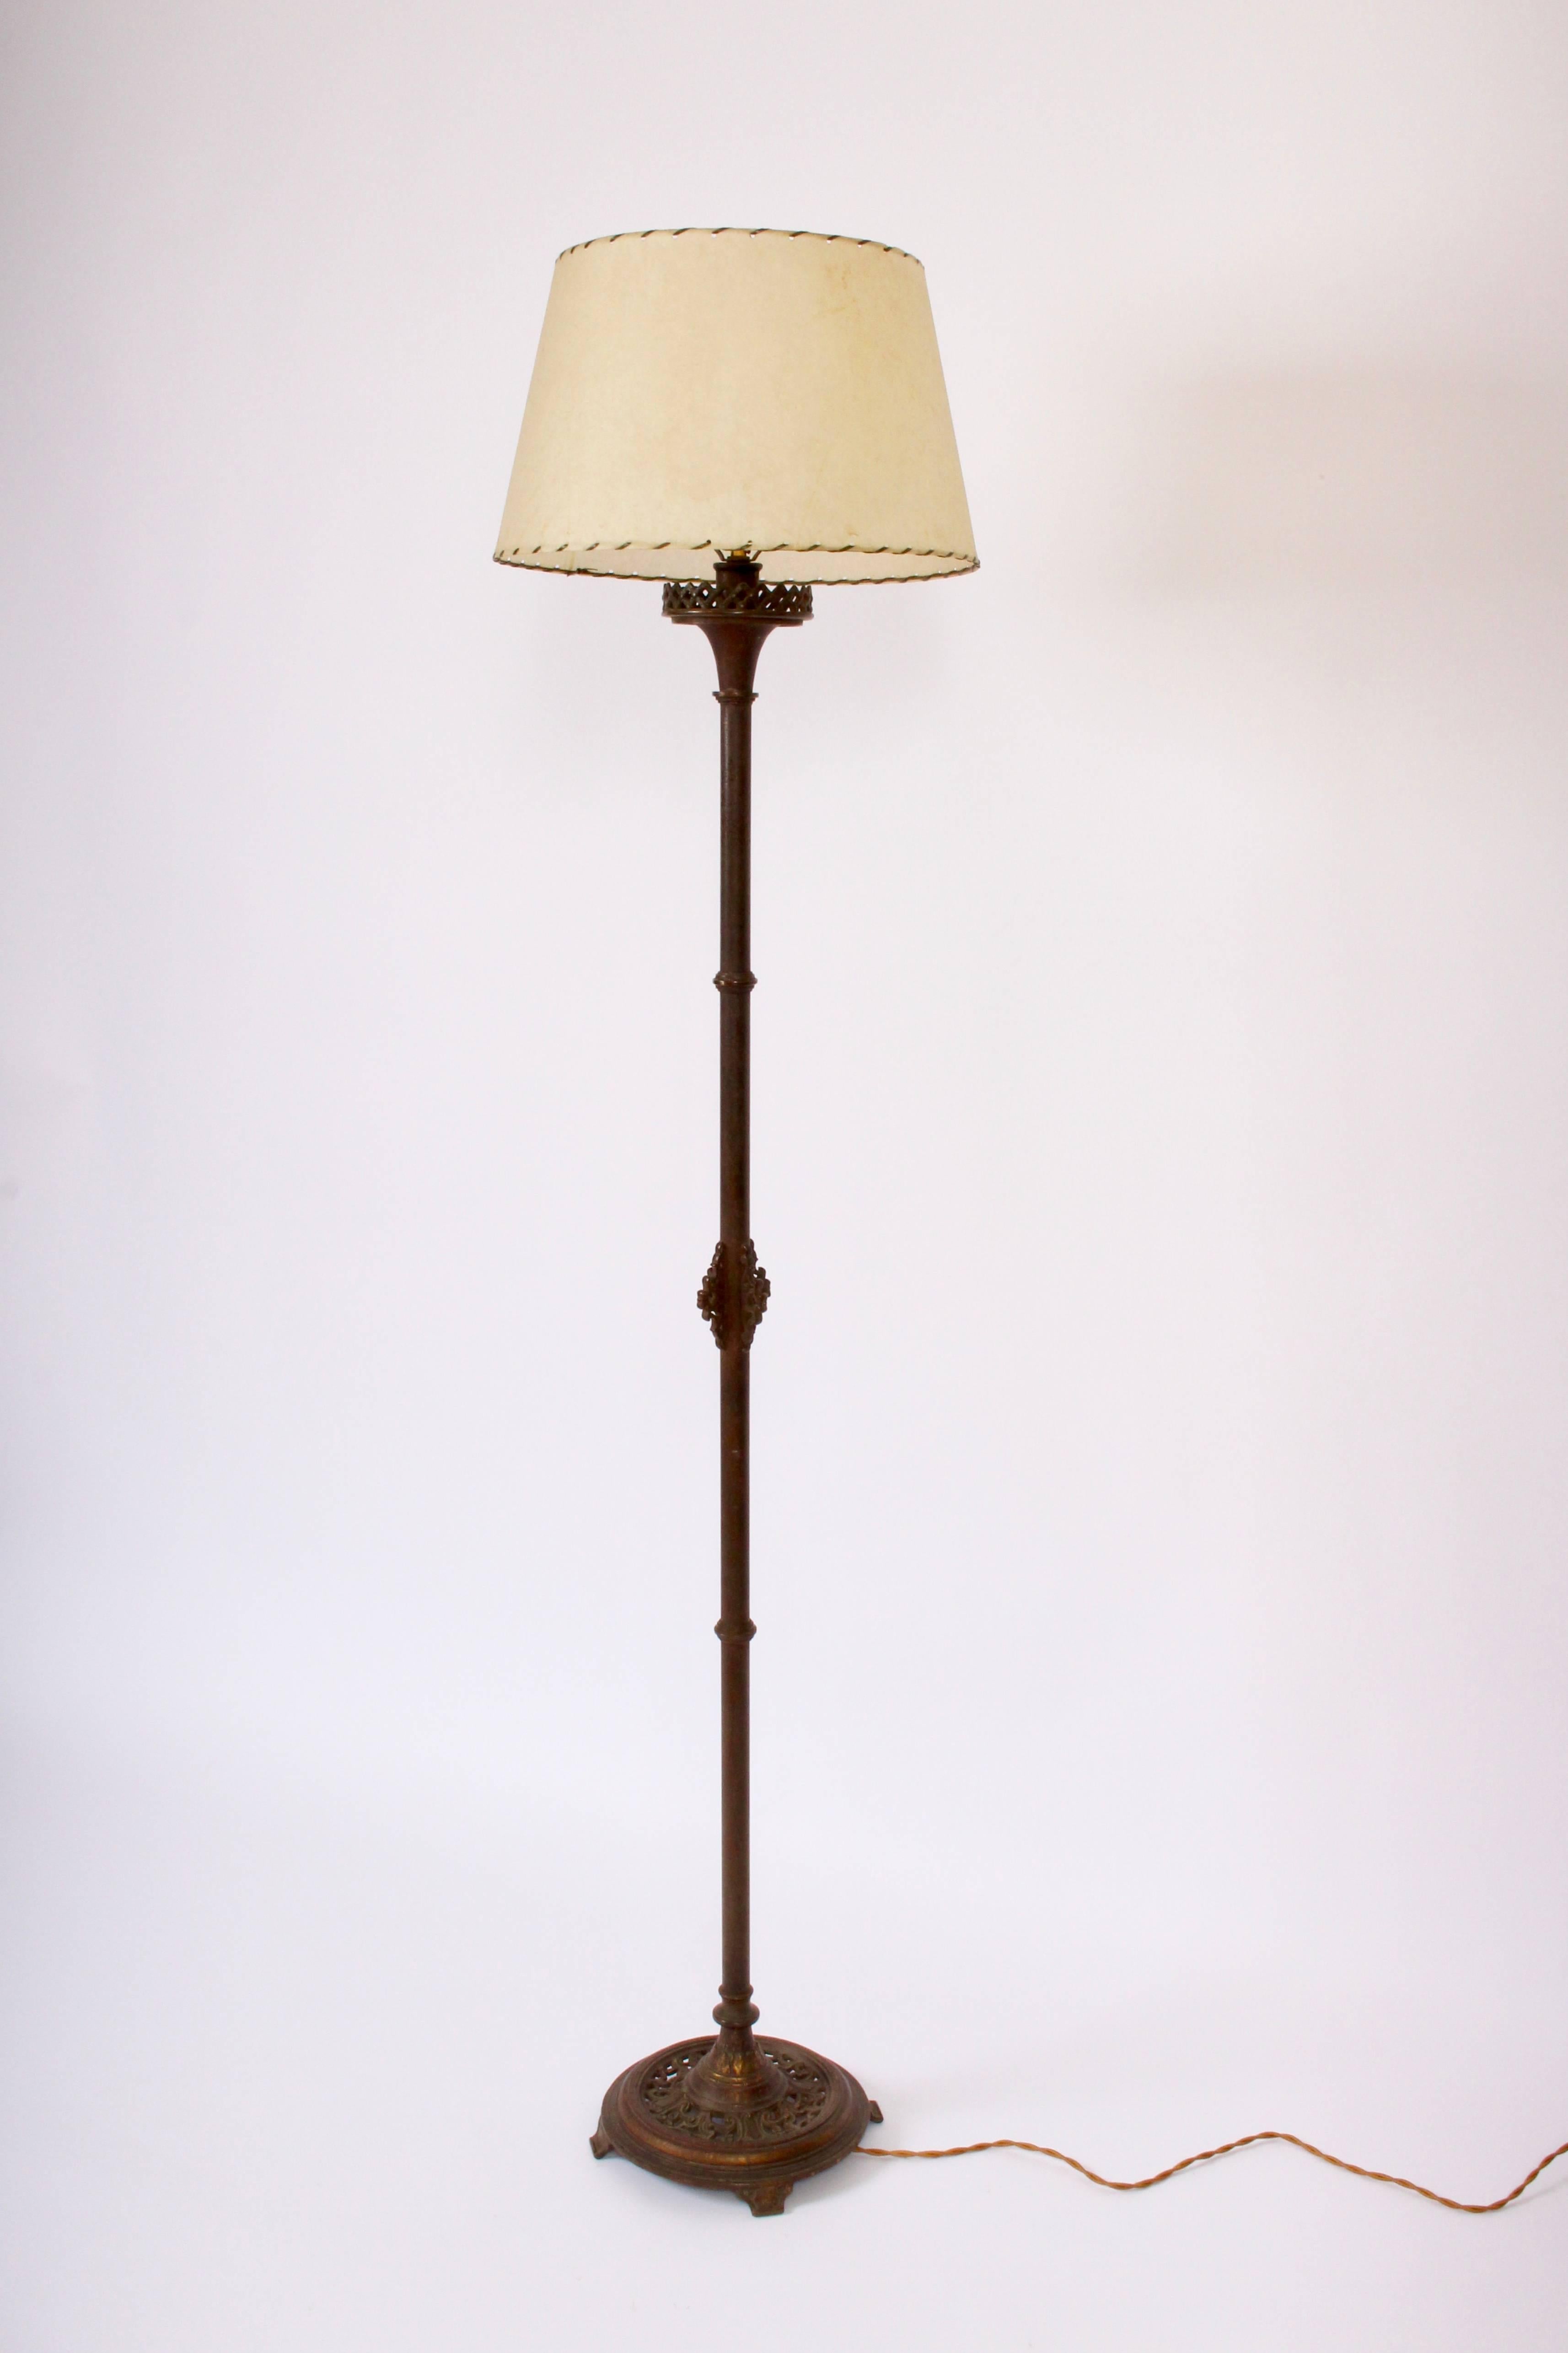 Oscar Bruno Bach for The Segar Studios All Bronze Floor Lamp from the Early 20th Century. Featuring detailed Bronze work with original patina, harp (8.5H) and finial. On round 10D base. Lamp shade shown for display only (9.5H x 11.5D top x 14.5D